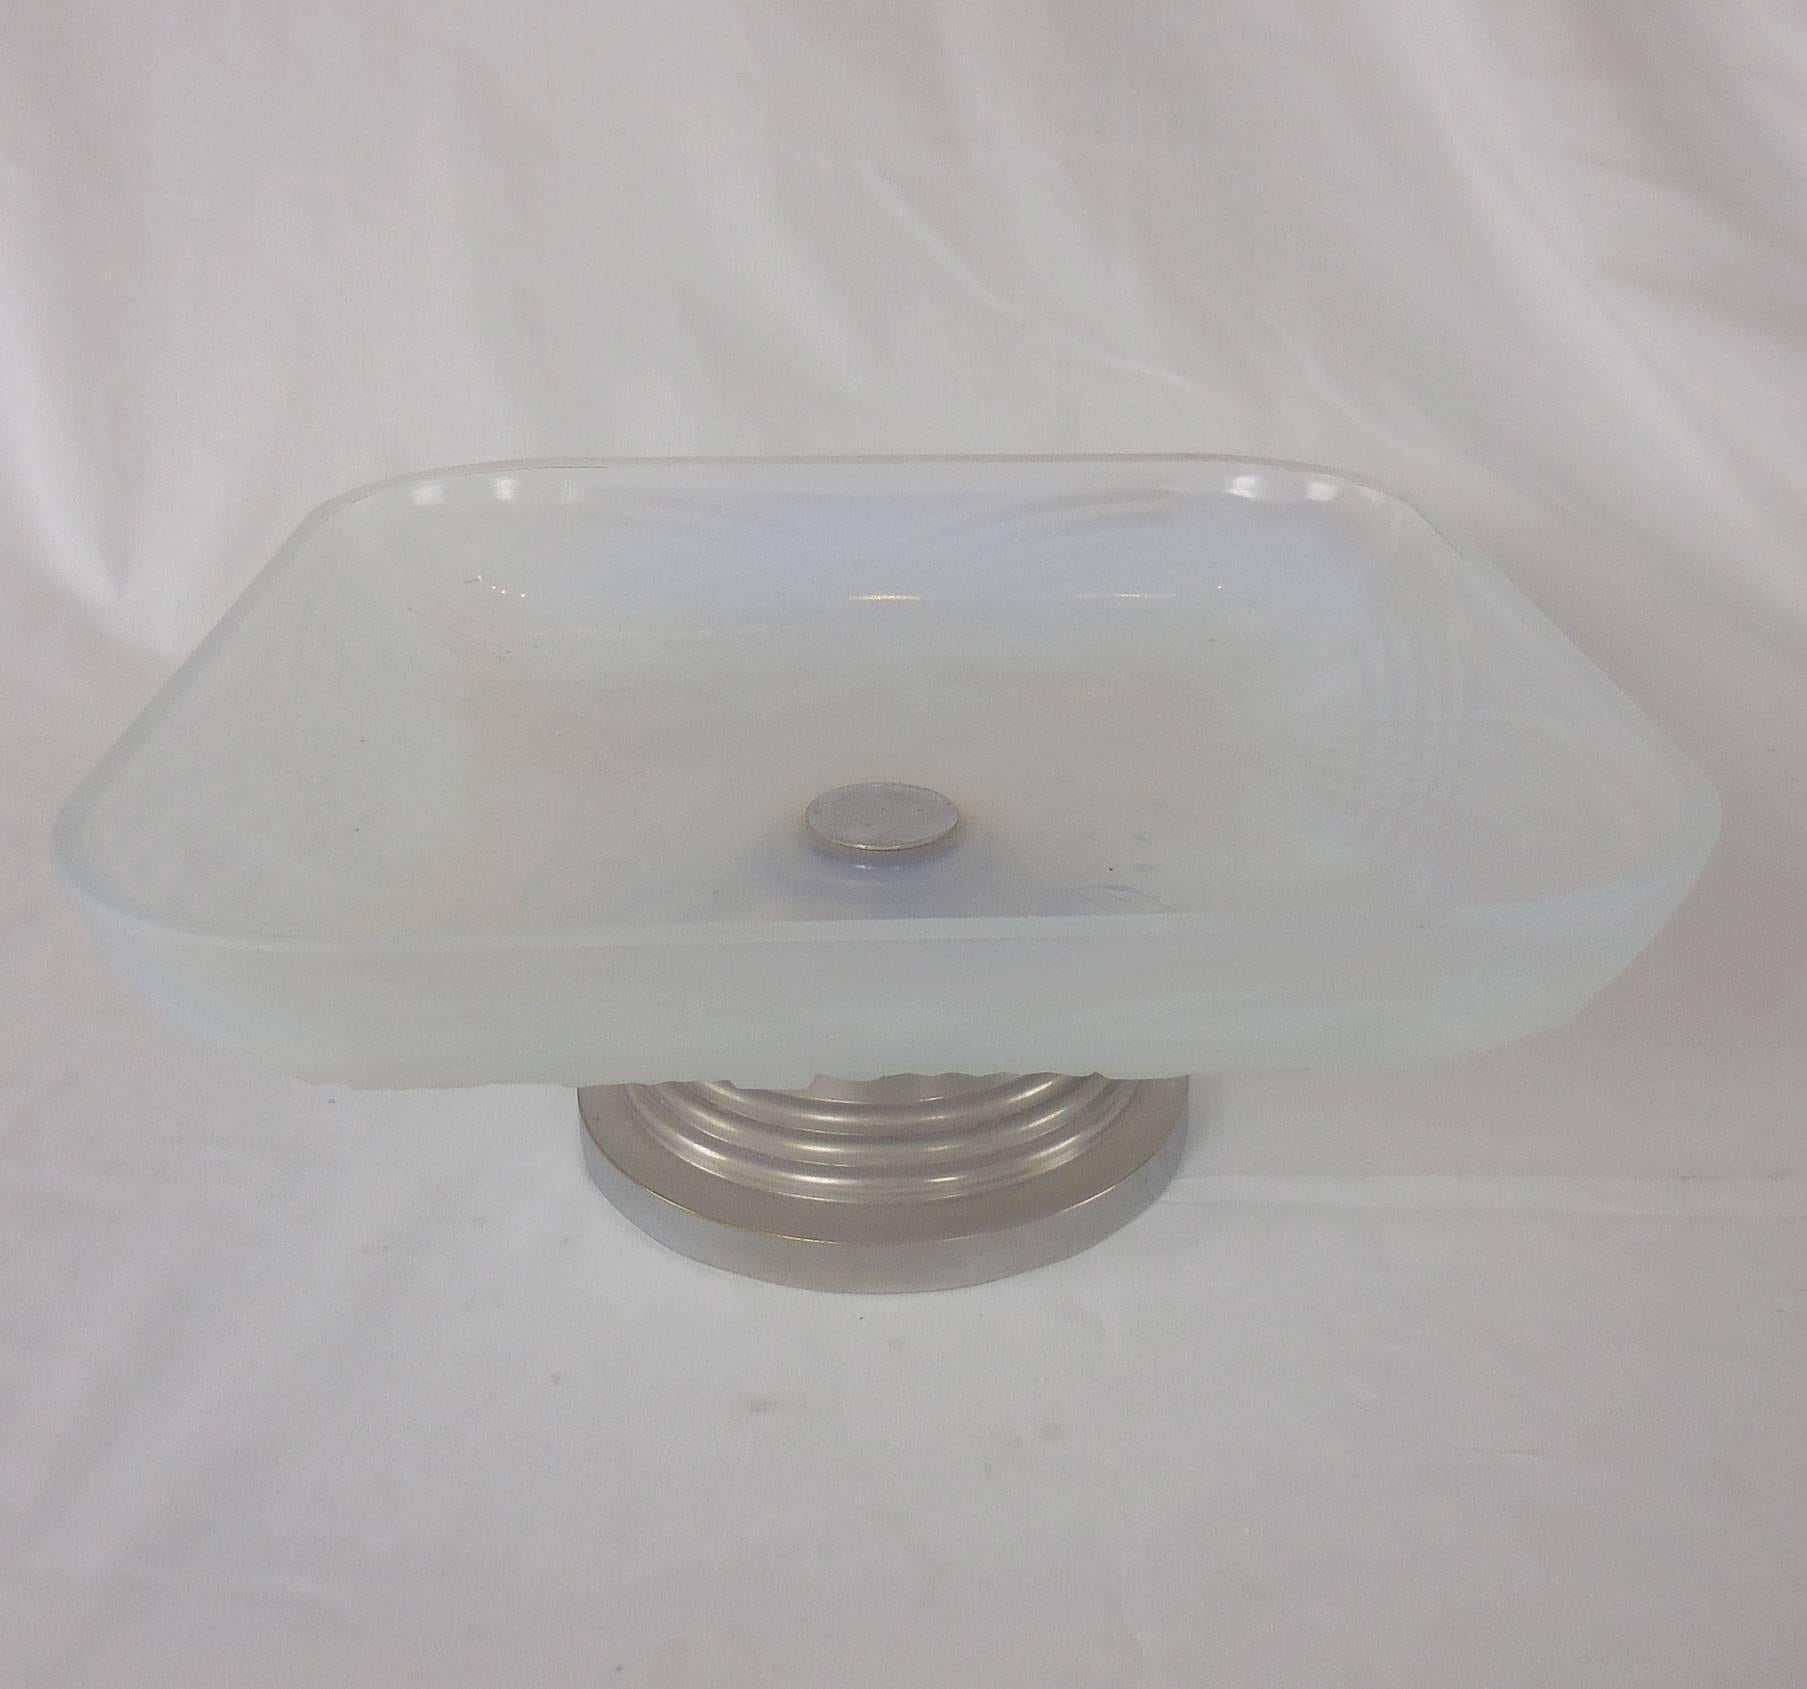 Beautiful large French Art Deco centerpiece opalescent glass Tazza featuring molded relief flower and leaf motifs accented by arched lines to rounded corners. Relief molded maker's mark, ''Julien France'' to underside. The circular stepped chrome